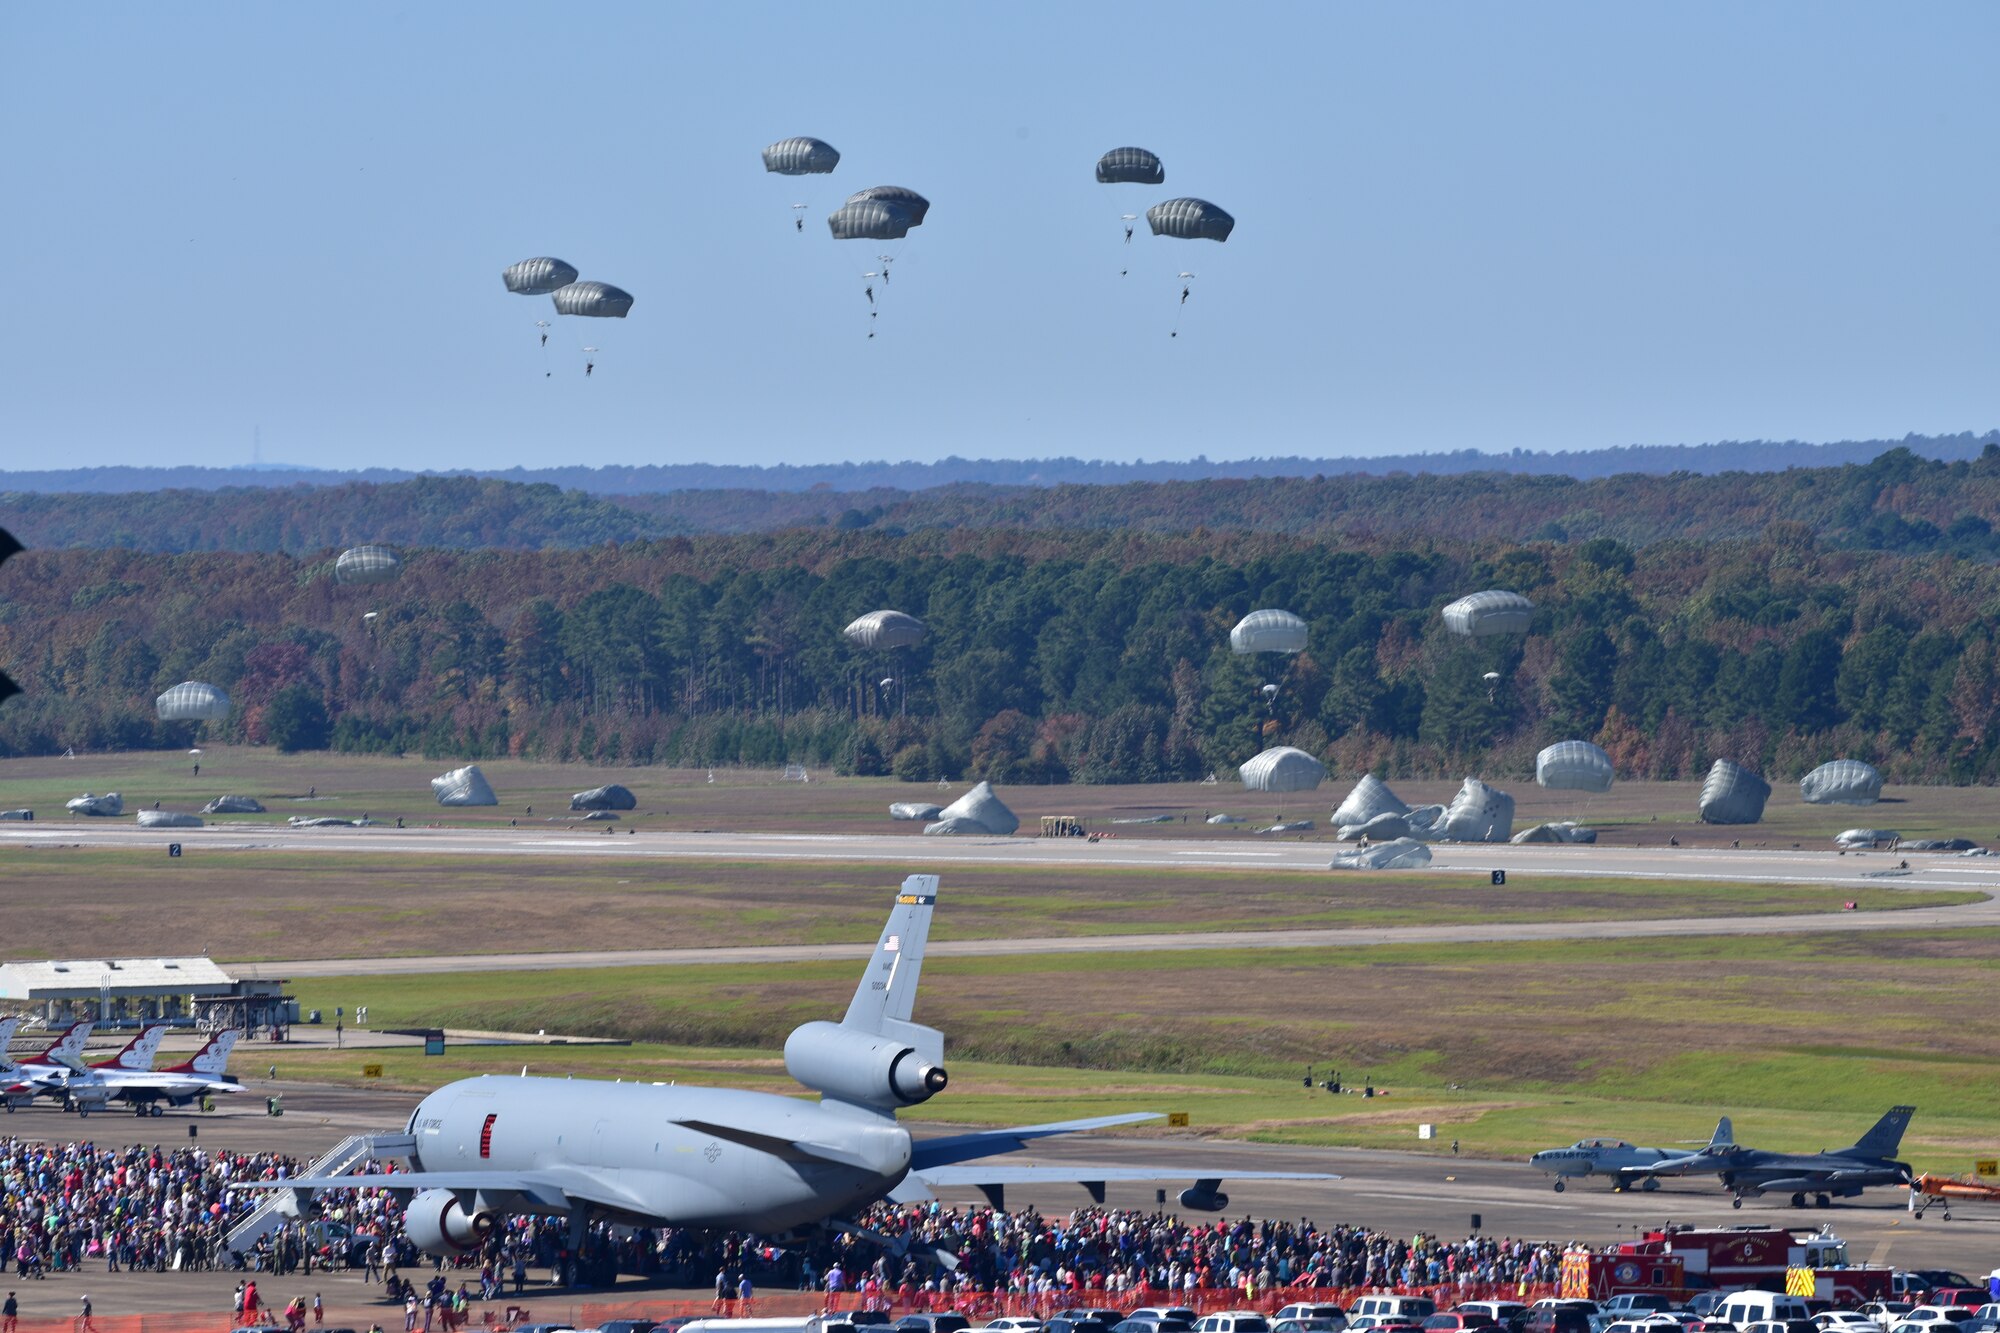 Parachutists glide from the sky onto a flightline during an airshow